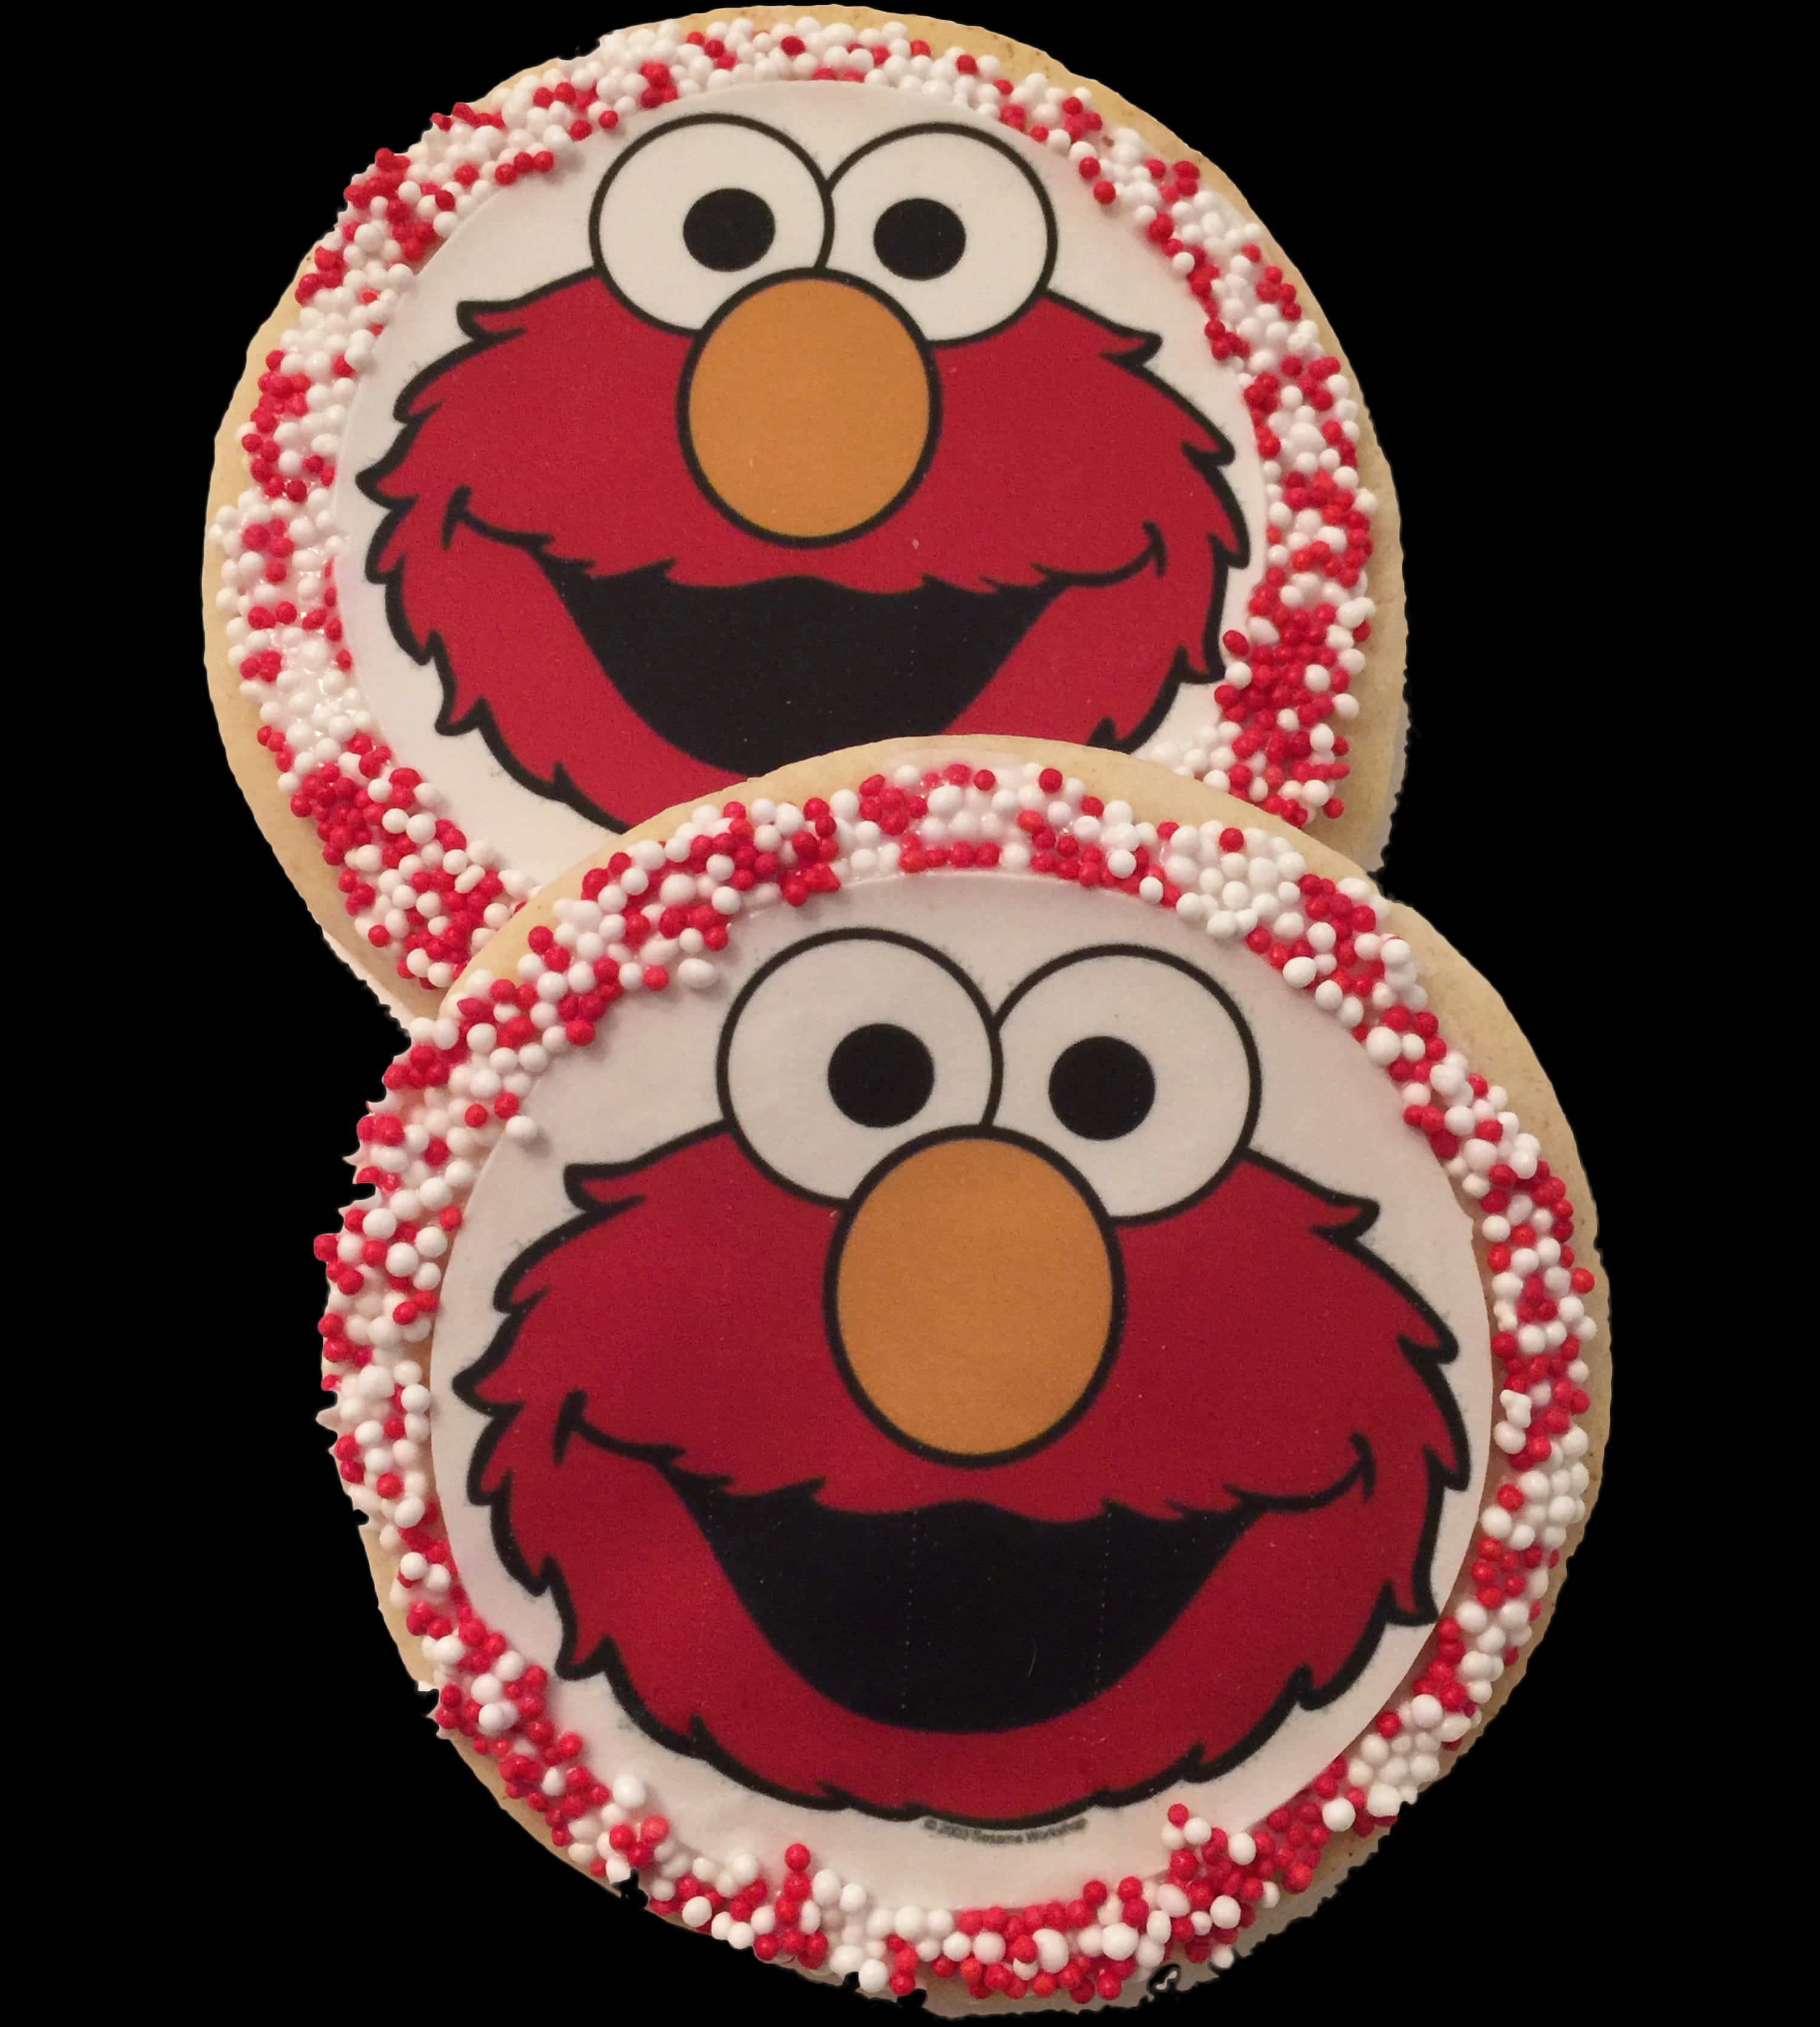 A Pair Of Cookies With A Red Face